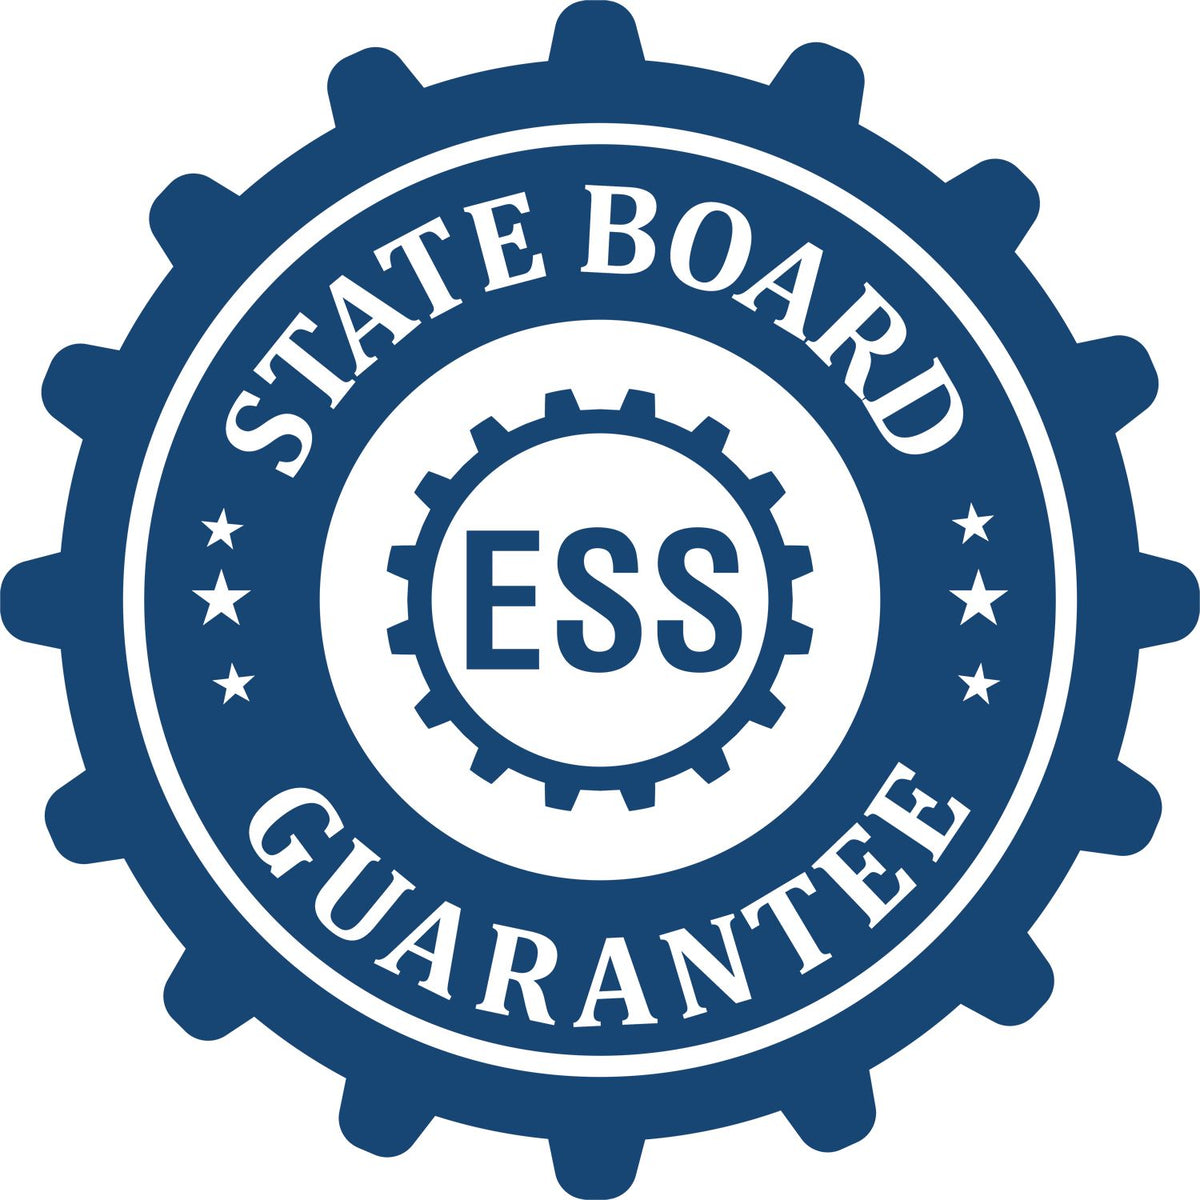 An emblem in a gear shape illustrating a state board guarantee for the Premium MaxLight Pre-Inked Virginia Landscape Architectural Stamp product.